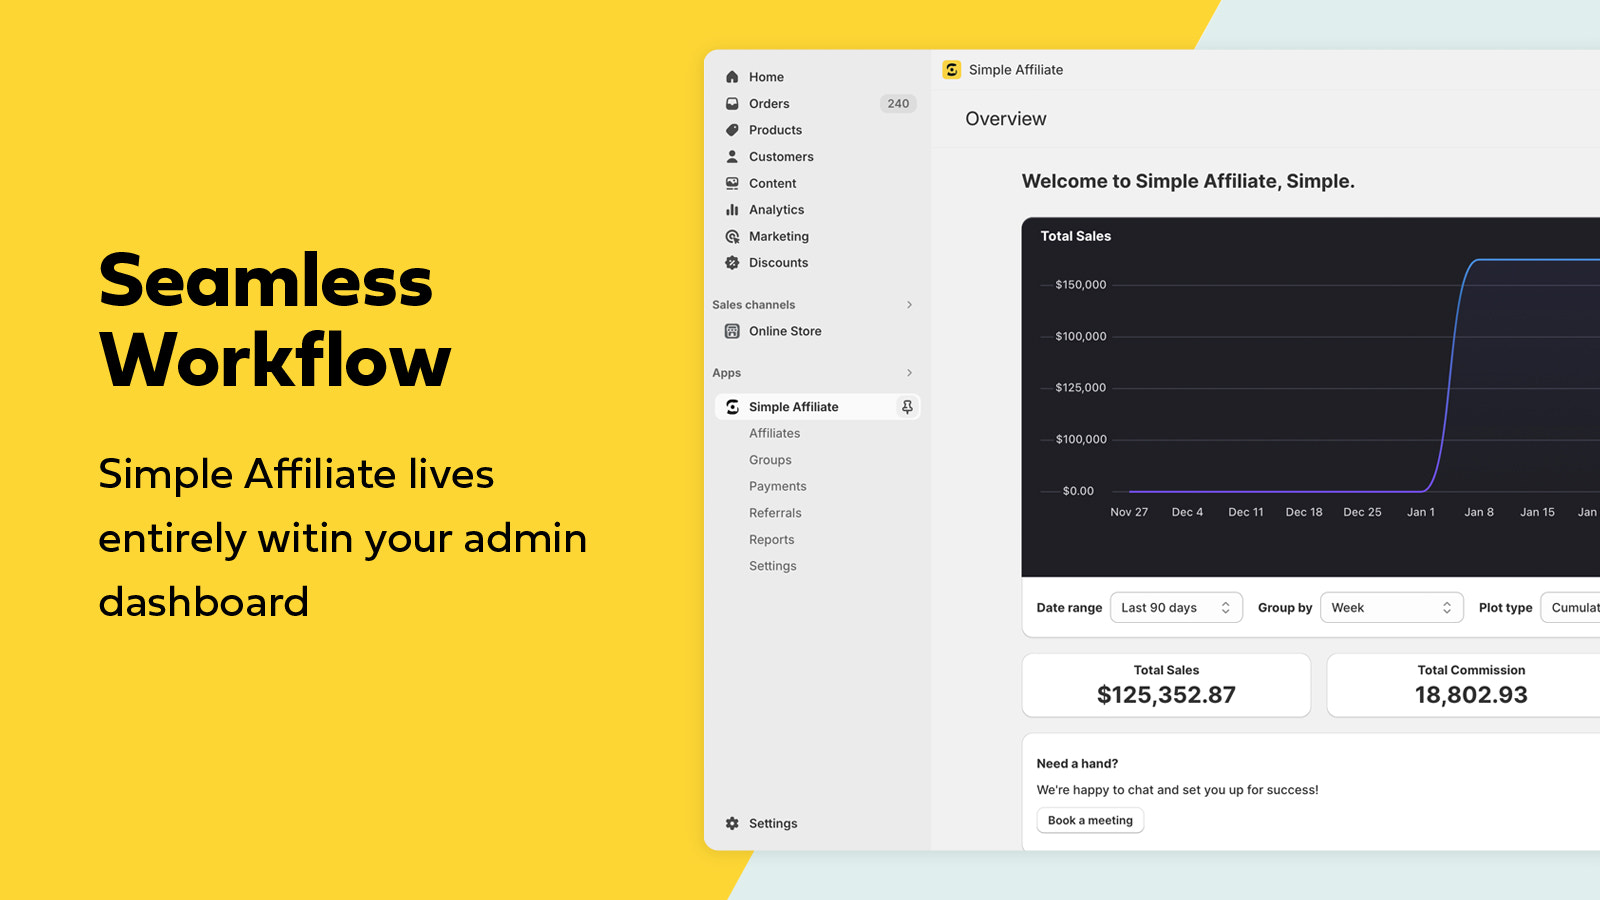 Seamless workflow - Simple affiliate lives 100% in your admin